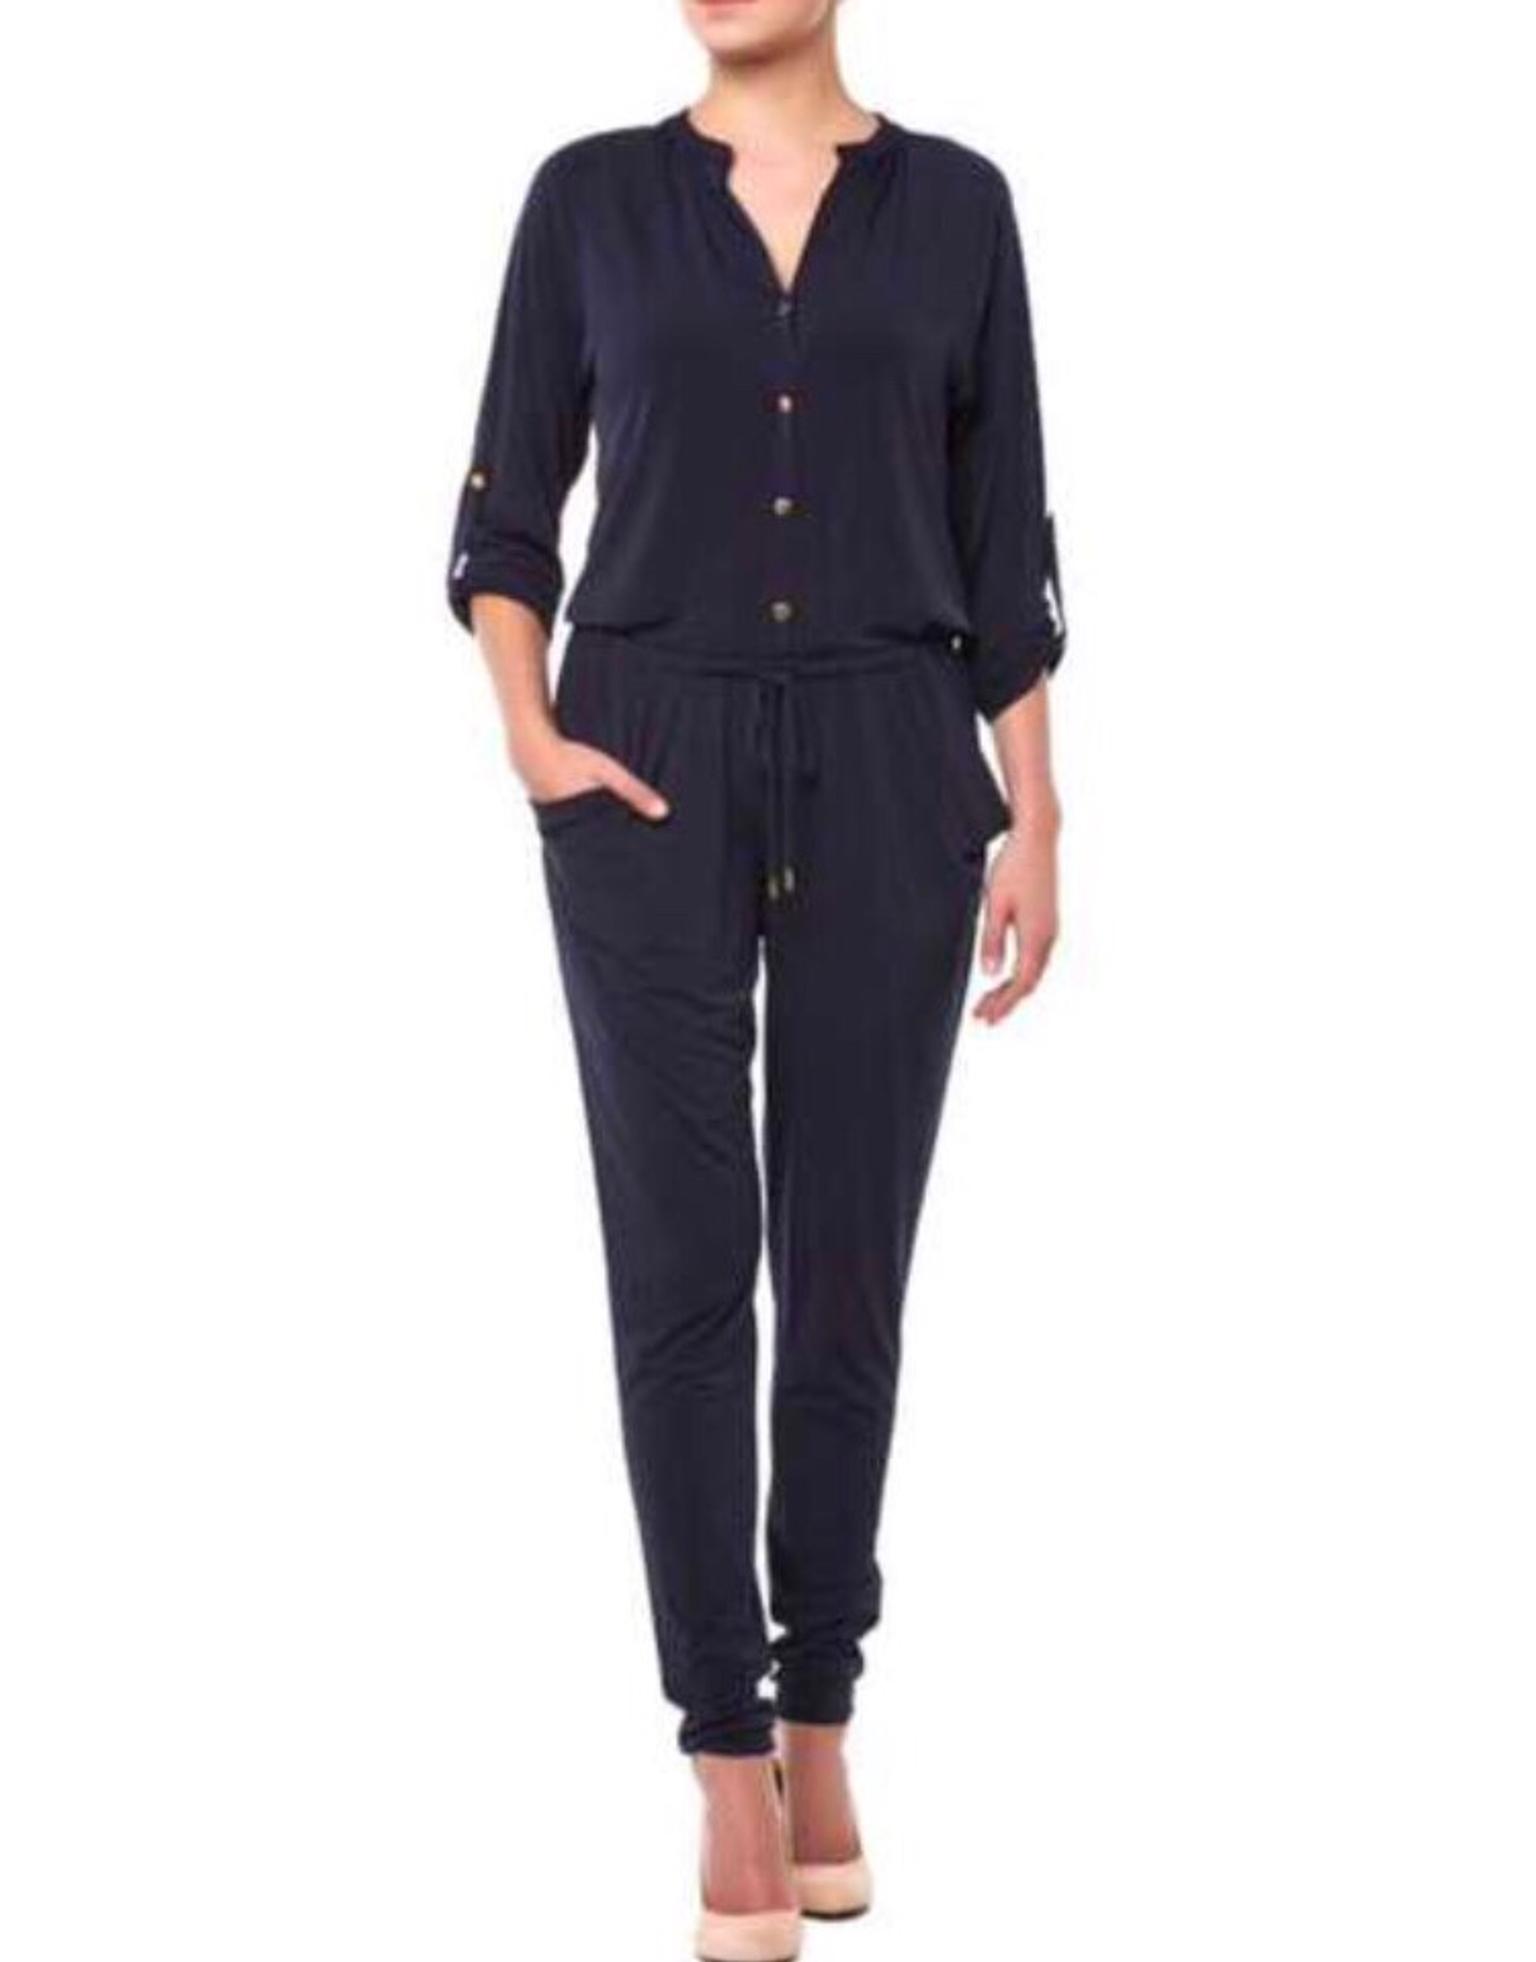 Michael Kors Overall in 1210 Wien for 